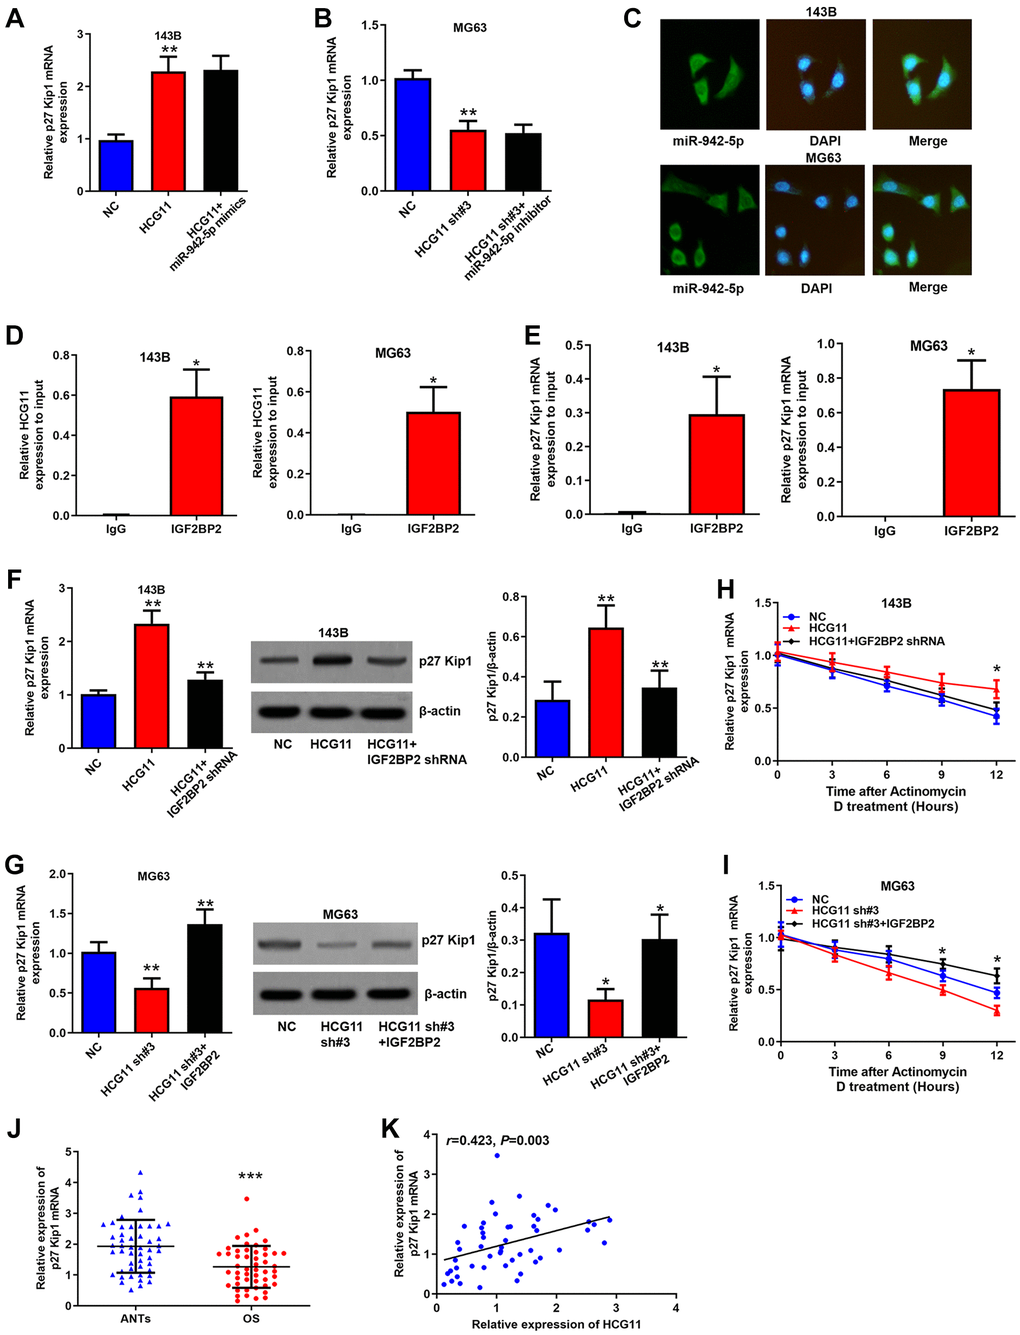 HCG11 raises p27 Kip1 expression via binding to IGF2BP2. (A, B) Regulation of HCG11 and miR-942-5p on p27 Kip1 mRNA level was detected by qRT-PCR. (C) Subcellular localization of IGF2BP2 was confirmed by immunofluorescence. (D, E) Integration of HCG11 and p27 Kip1 mRNA with IGF2BP2 was proved by RIP assay. (F, G) Regulation of HCG11 and IGF2BP2 on p27 Kip1 mRNA and protein level was estimated by qRT-PCR and western blot. (H, I) Influence of HCG11 and IGF2BP2 on p27 Kip1 mRNA degradation was estimated by RNA stability analysis. (J) p27 Kip1 mRNA expression in OS tissues and ANTs was analyzed by qRT-PCR. (K) Correlation between p27 Kip1 mRNA expression and HCG11 expression was analyzed by Spearman’s analysis. *P **P ***P 